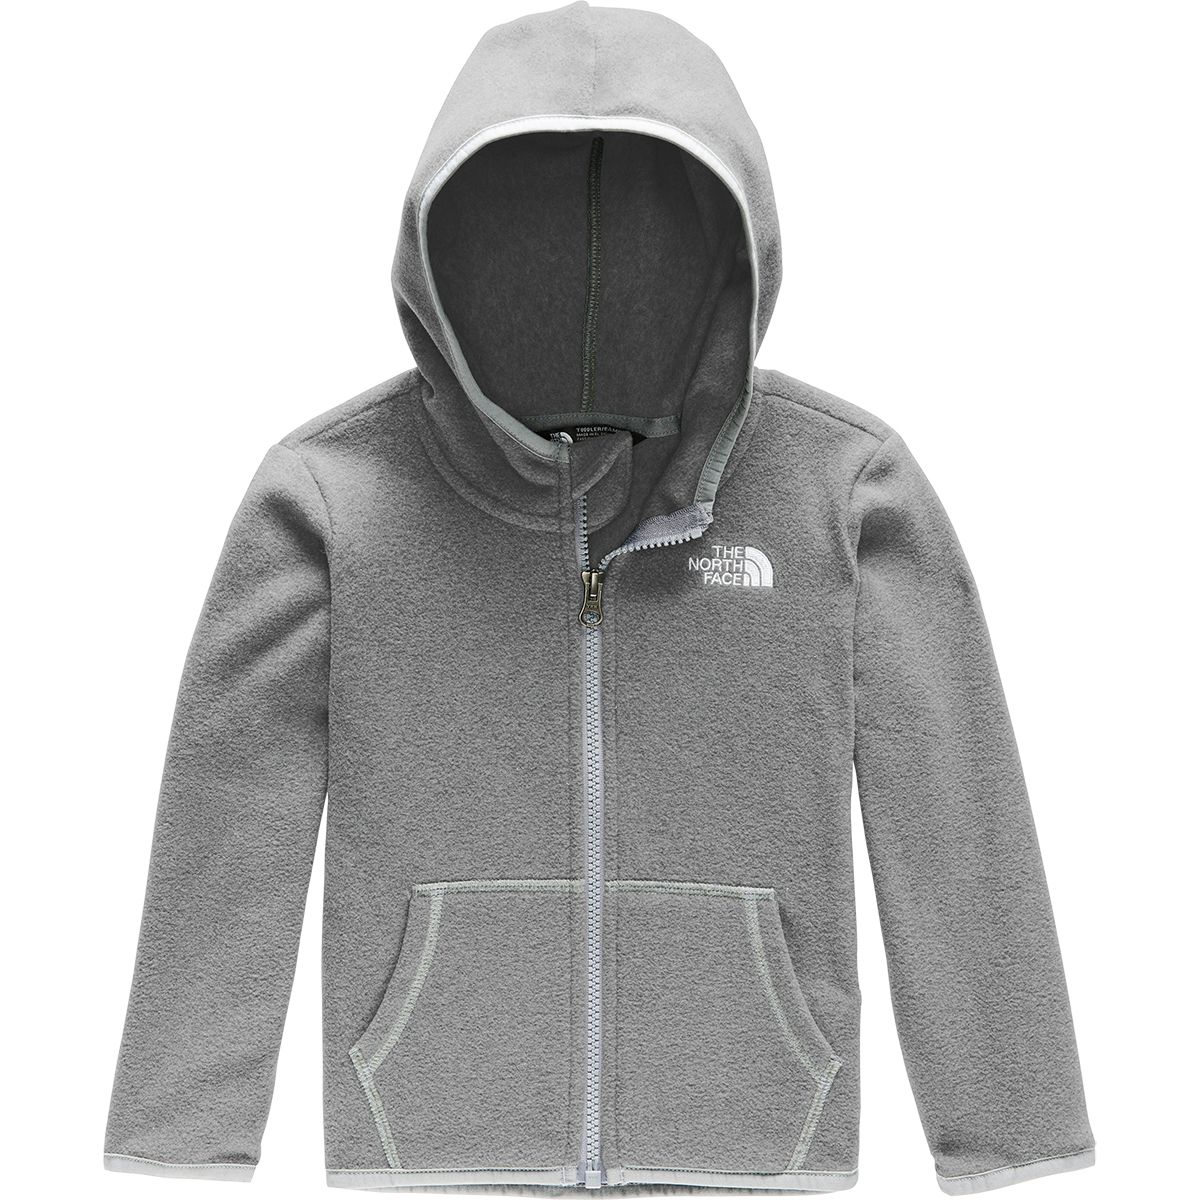 The North Face Glacier Full-Zip Hooded Jacket - Toddler Boys ...